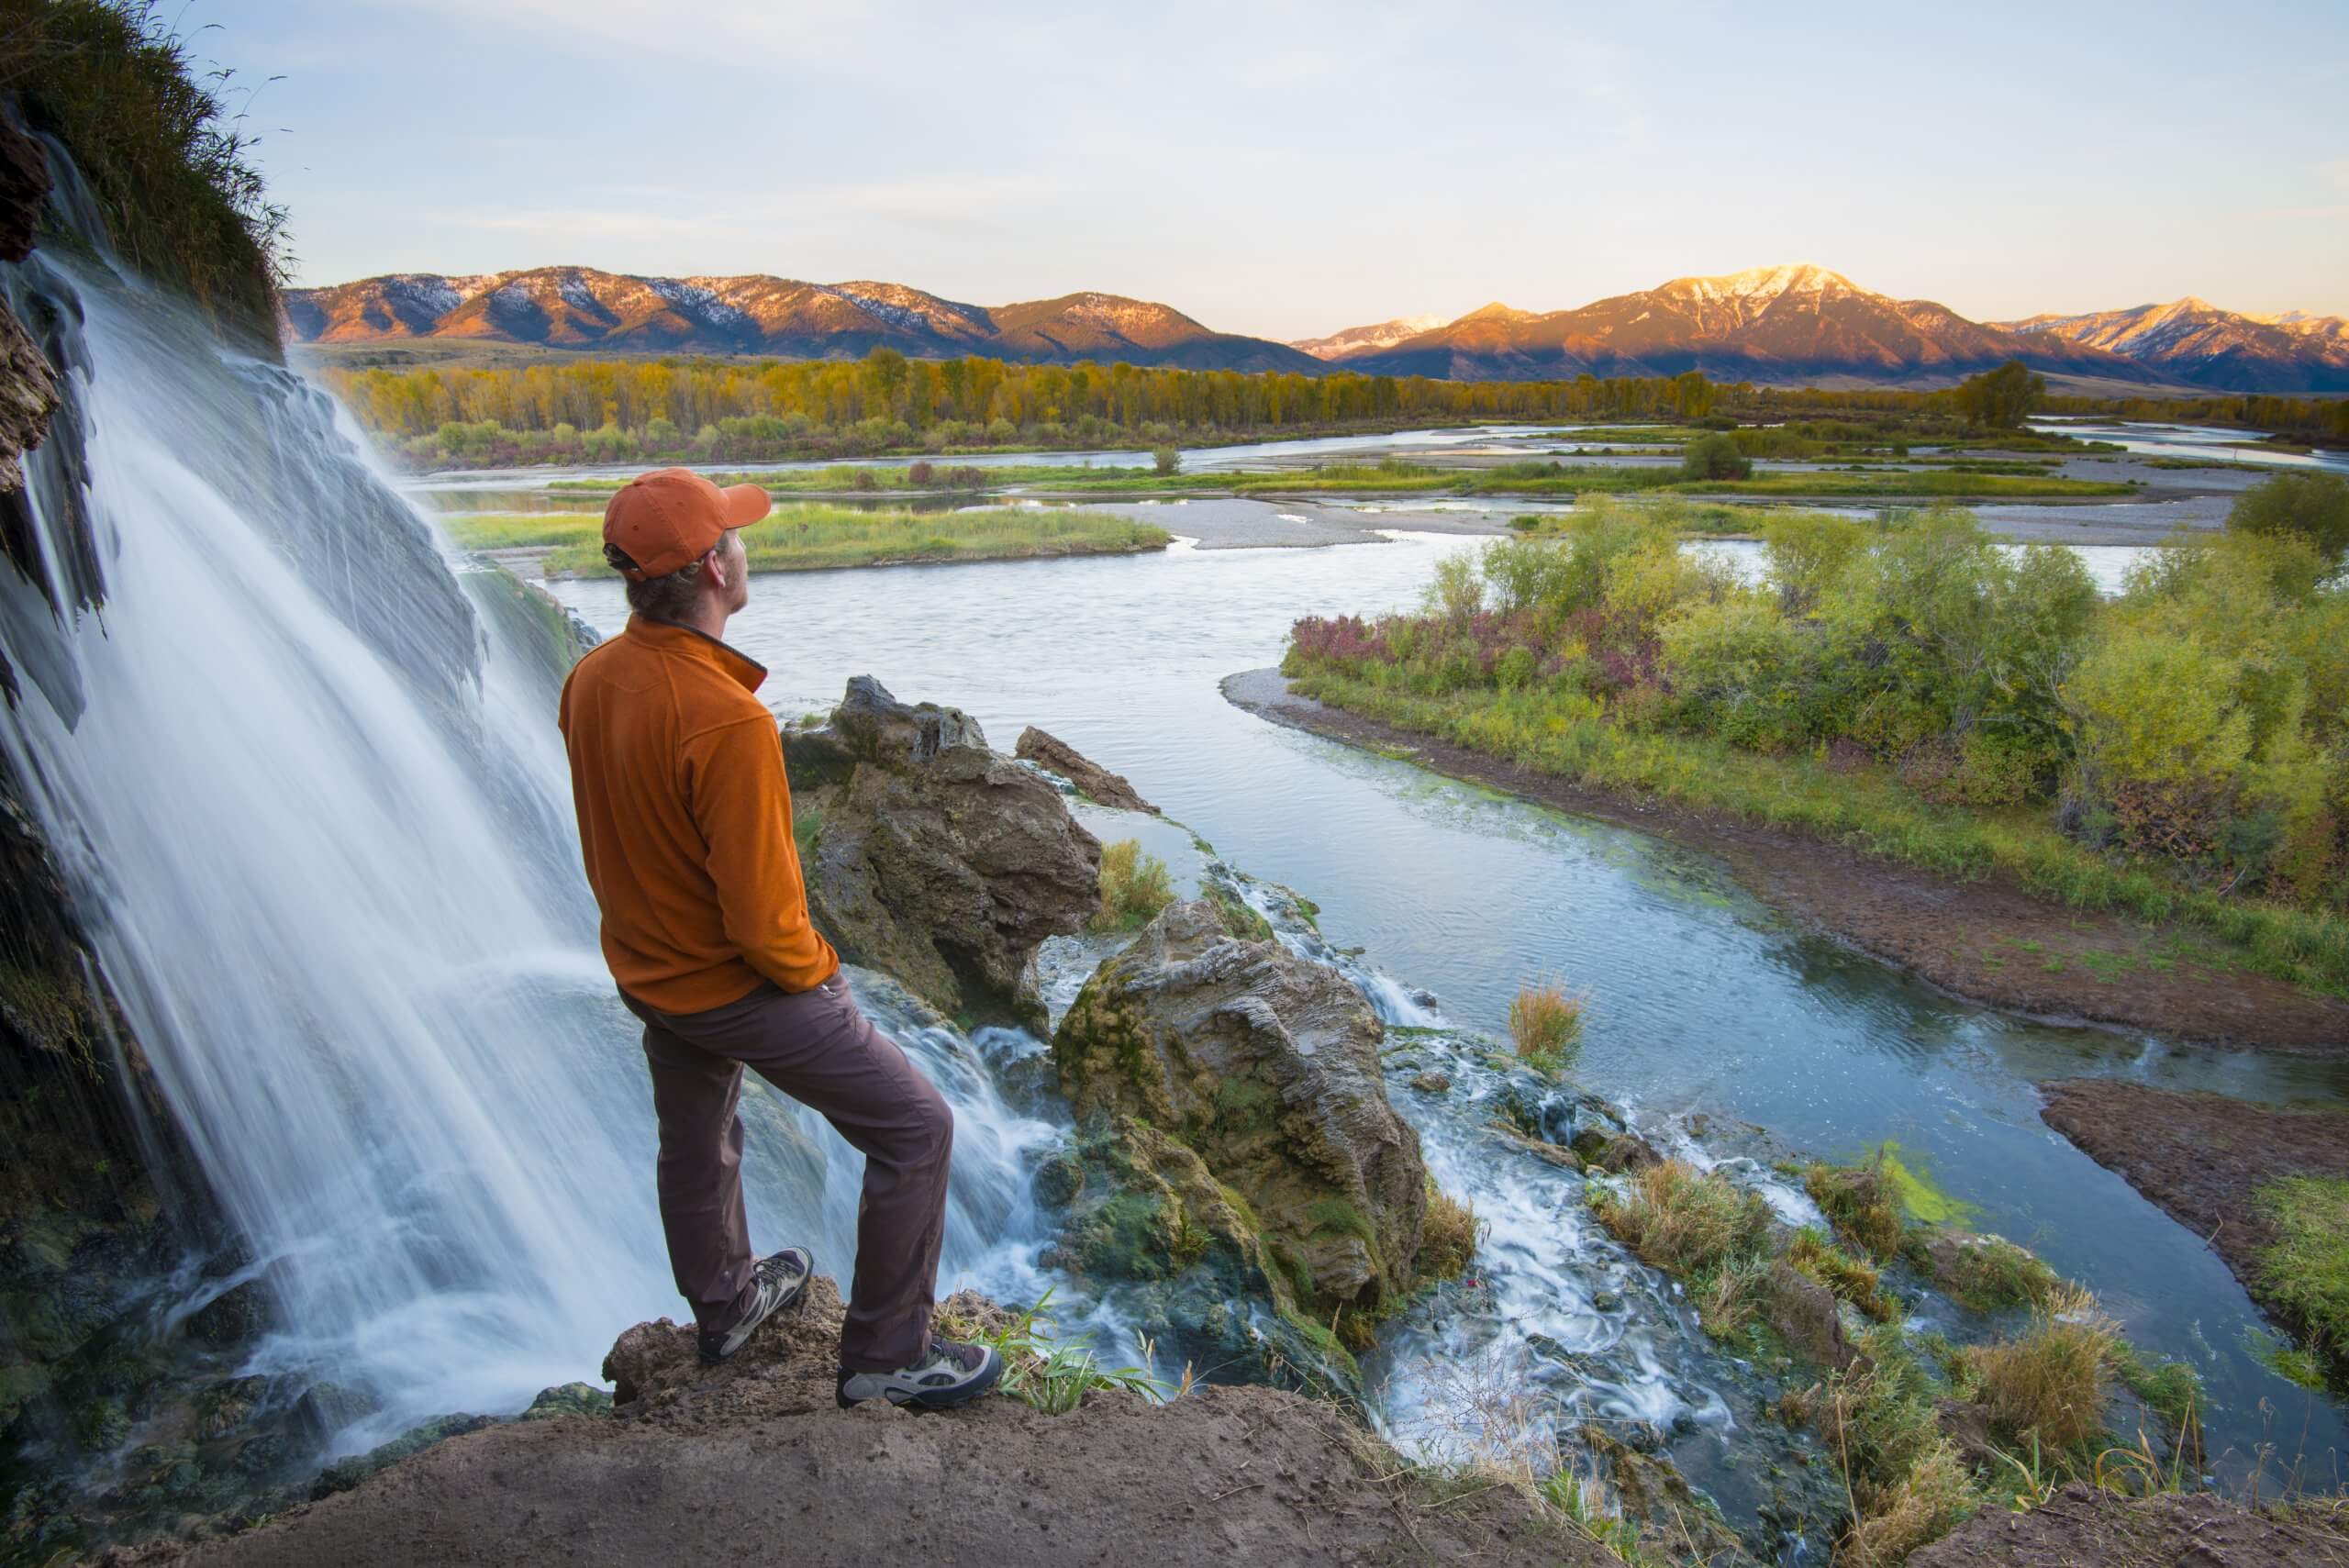 A man in an orange jacket and orange baseball hat stands next to a waterfall, overlooking a valley